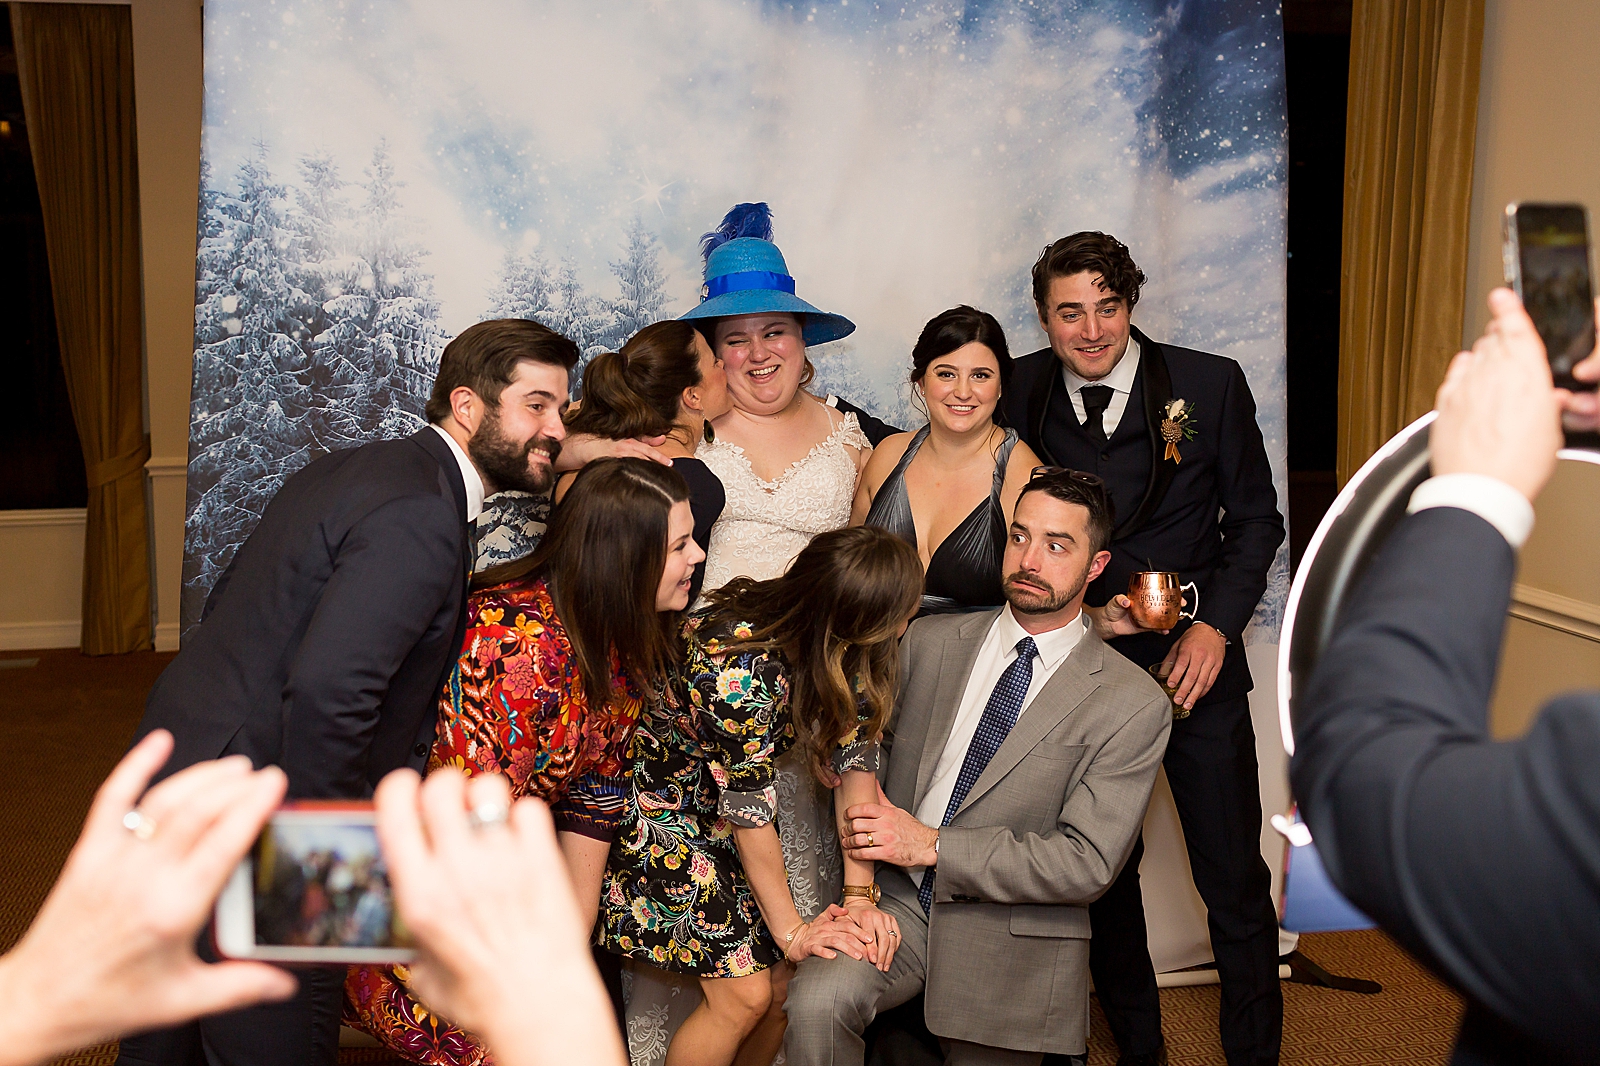 Guests taking quirky photobooth picture 